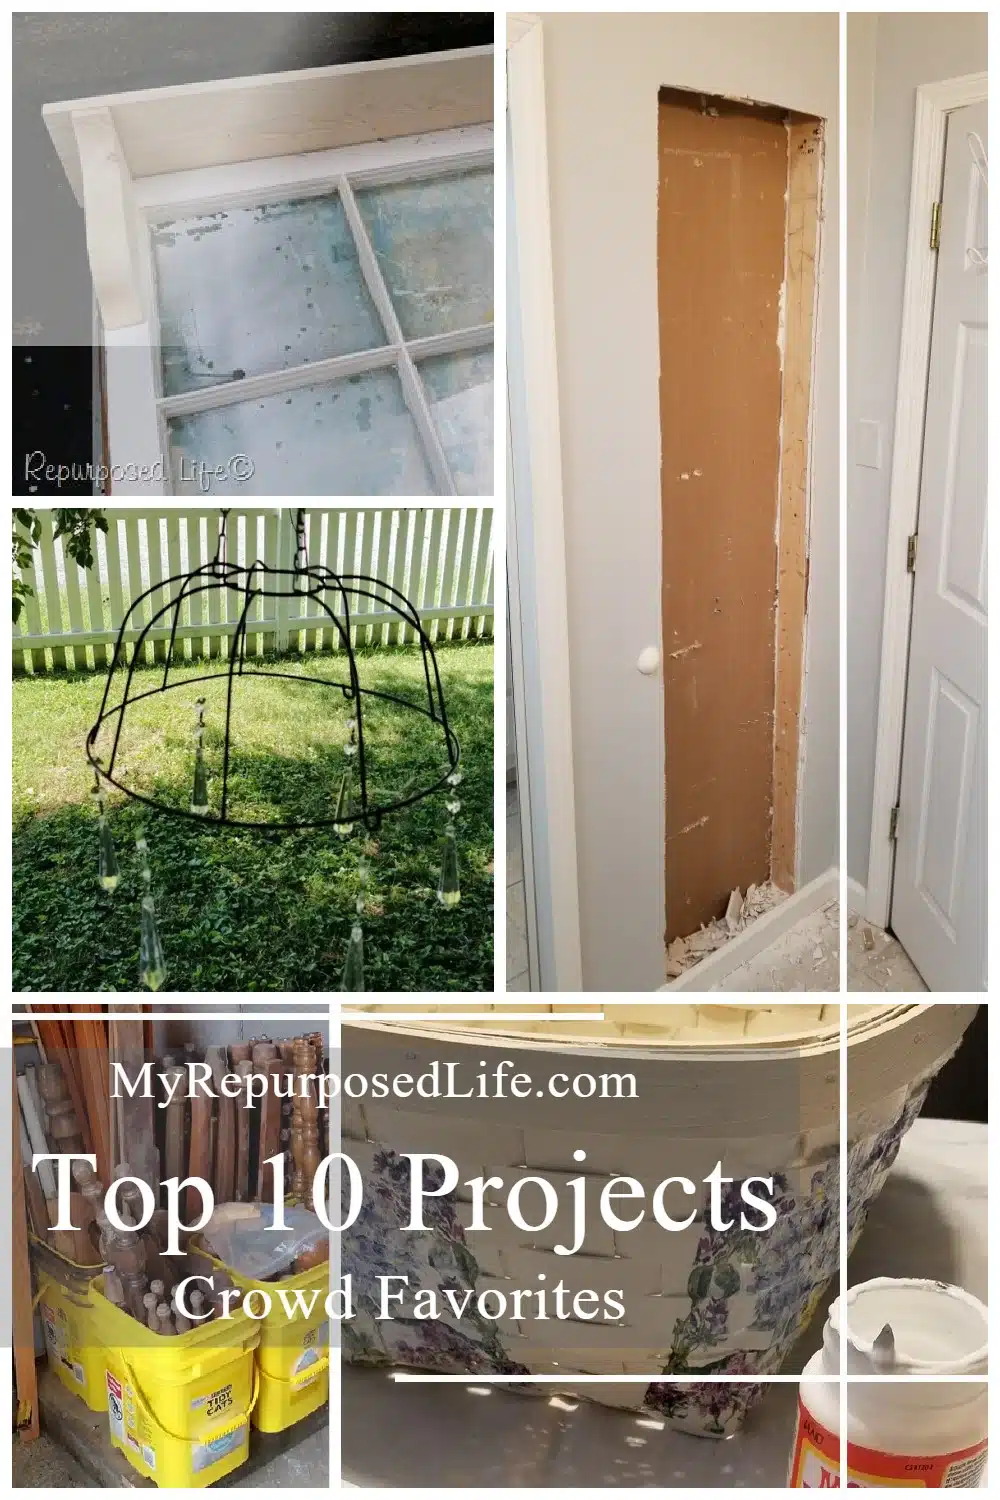 Crowd favorite projects from 2022. What DIY projects got the most traffic from social media and google referrals? You might be surprised! via @repurposedlife